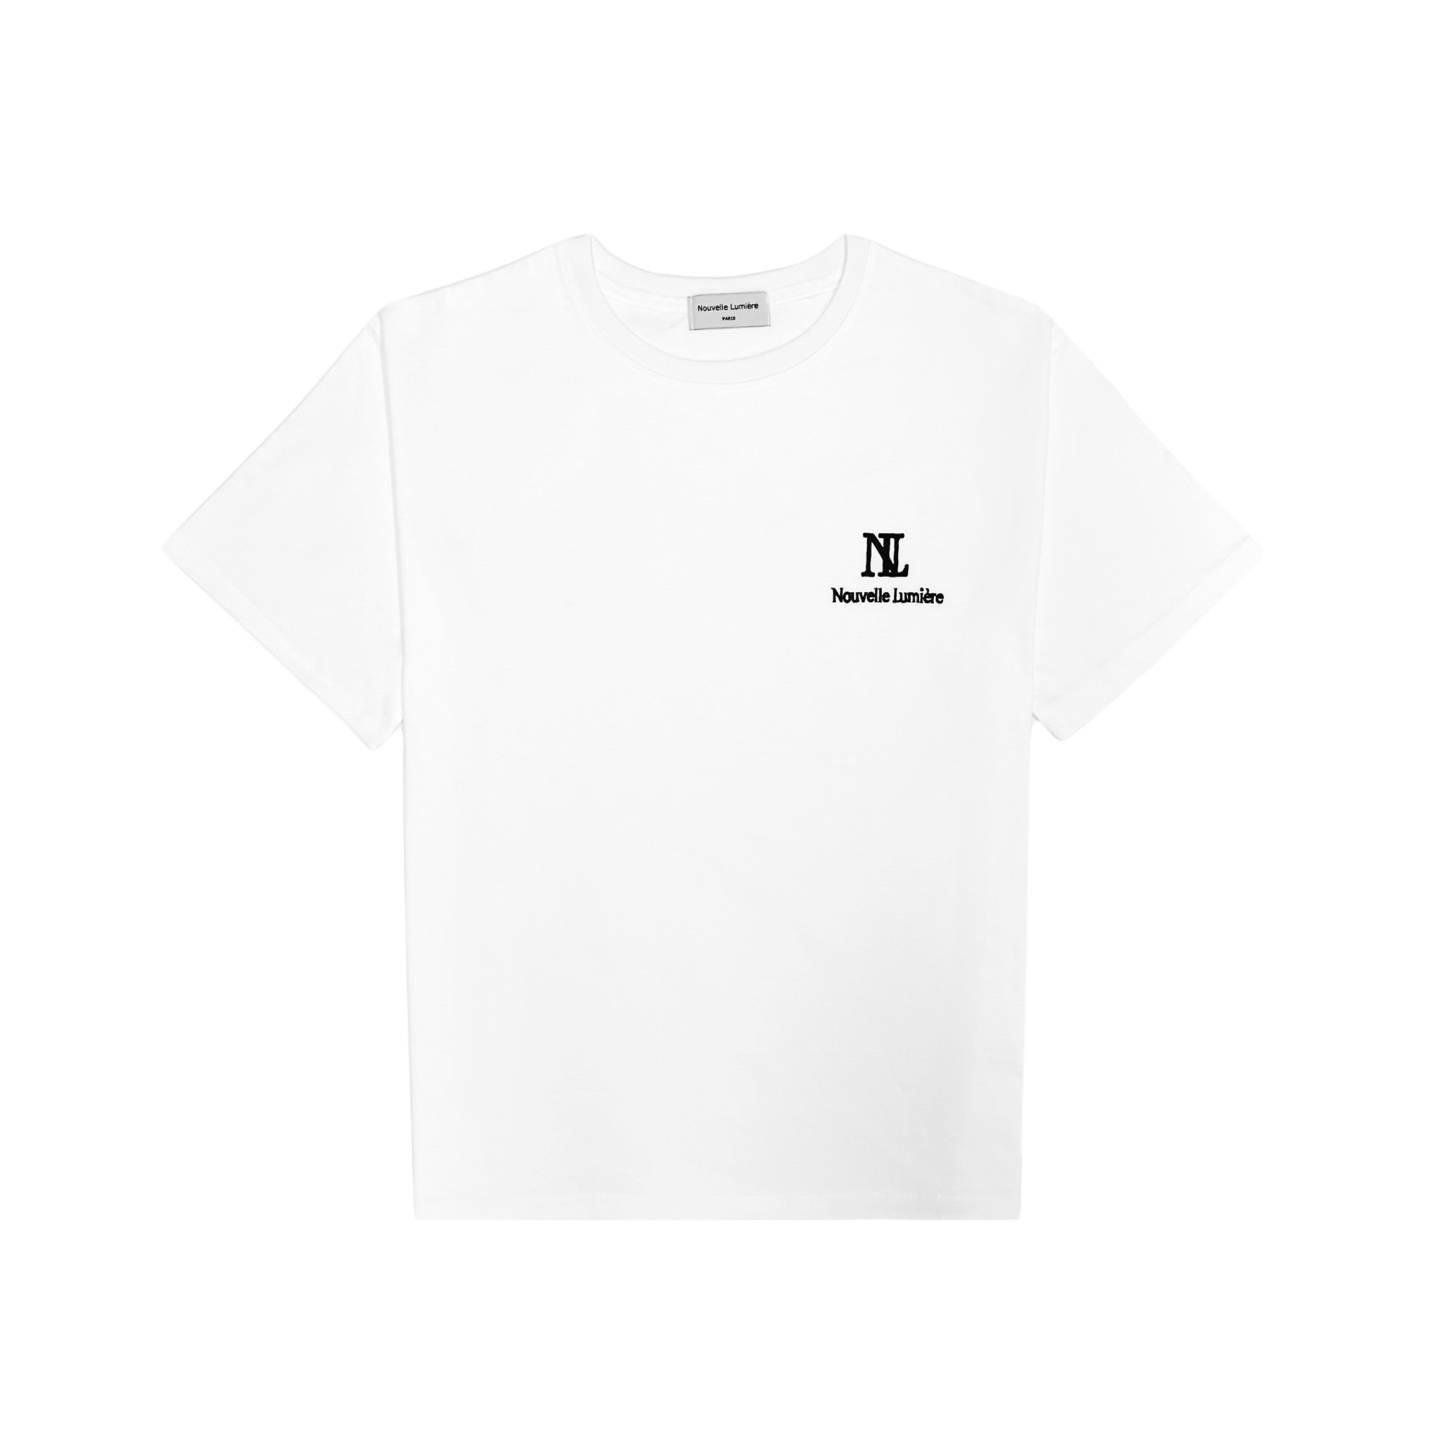 Nubelmiere Signature Logo White Short-Sleeved T-Shirt (Small ver.)